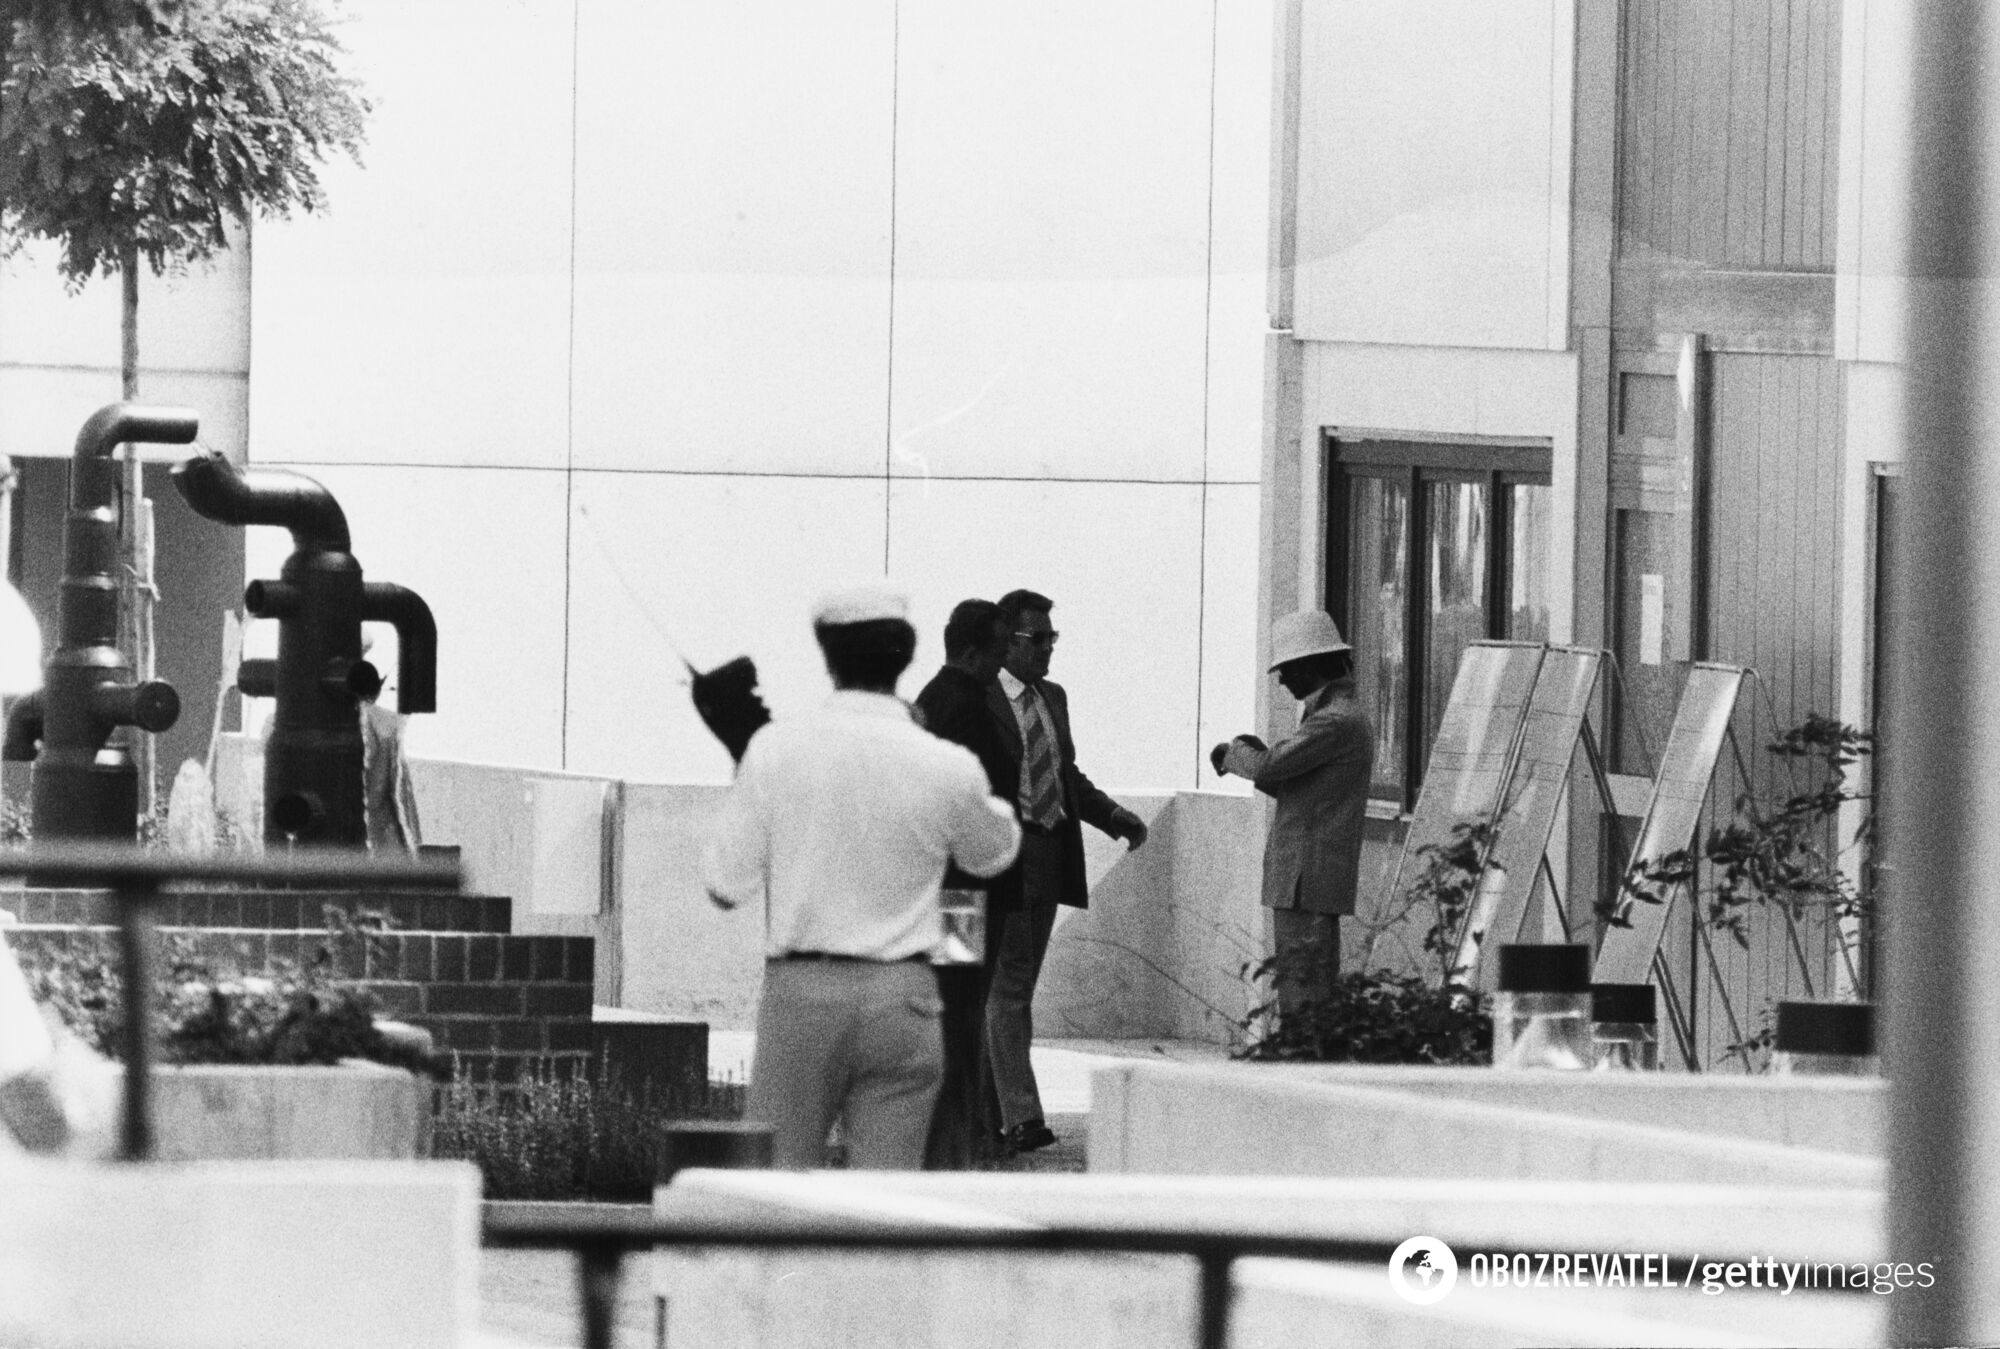 Shooting and blowing up hostages: the terrorist attack at the Munich Olympics that shocked the world